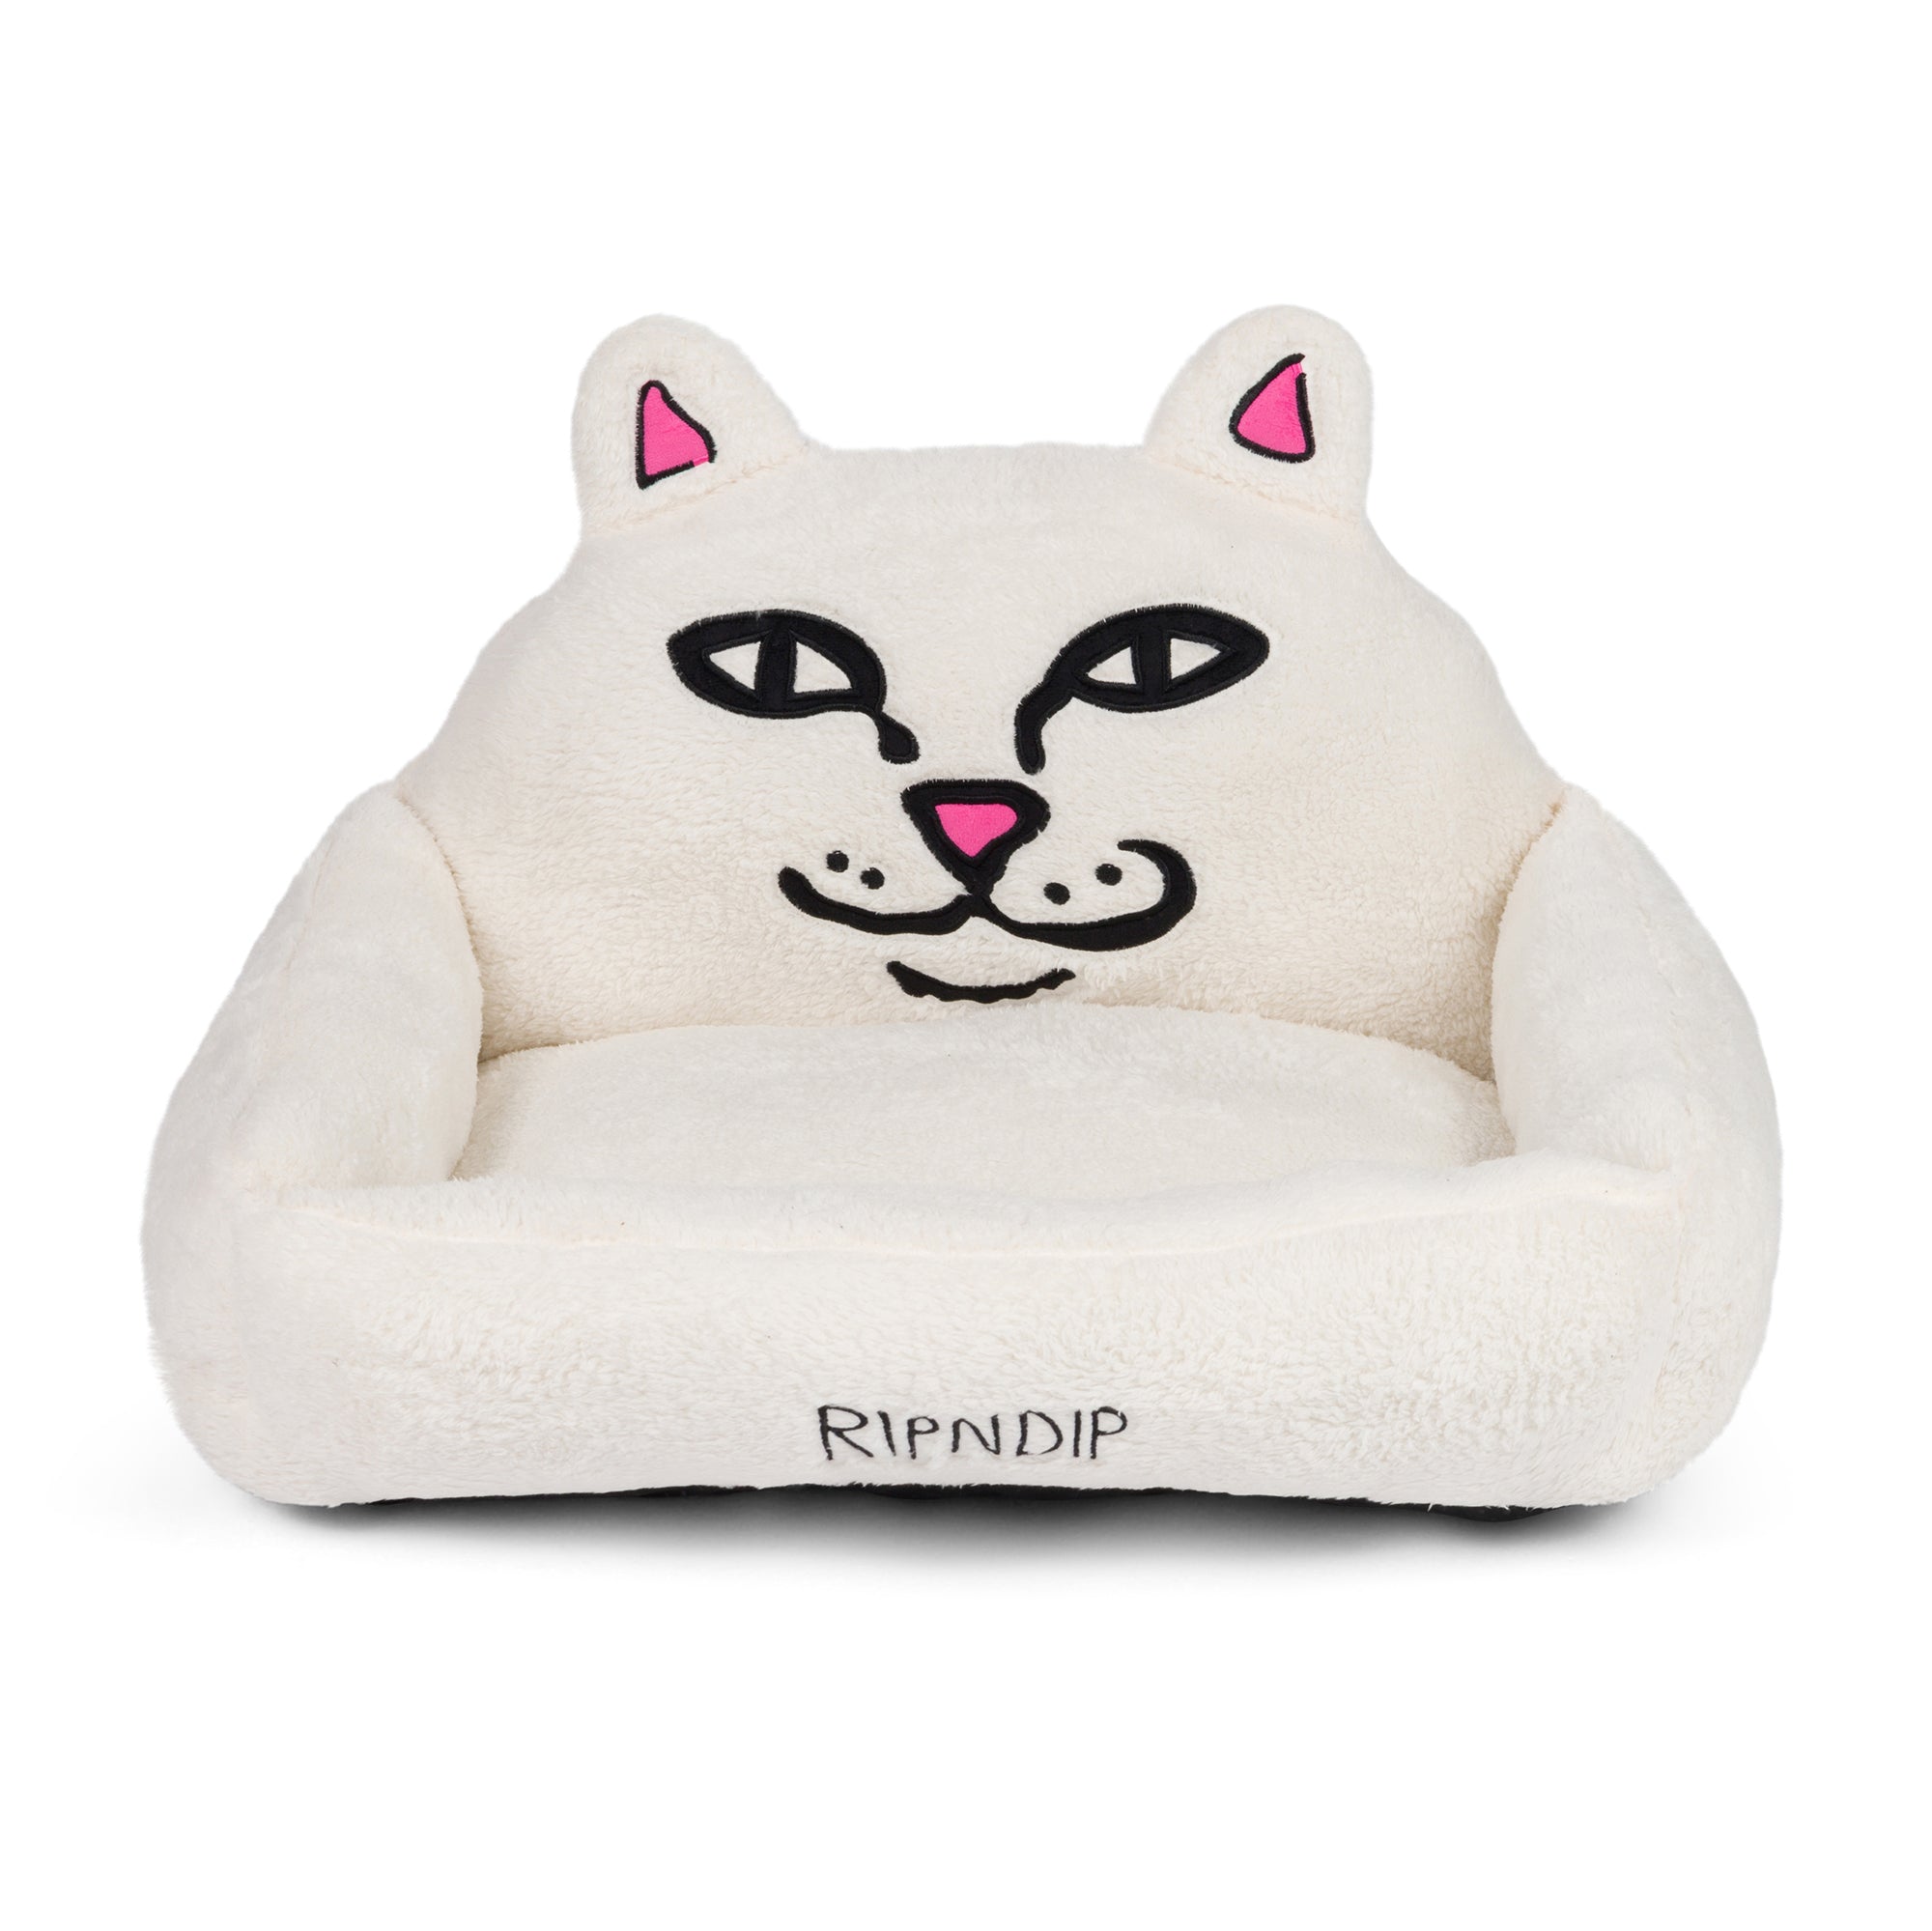 RipNDip Lord Nermal Small Pet Bed (White)